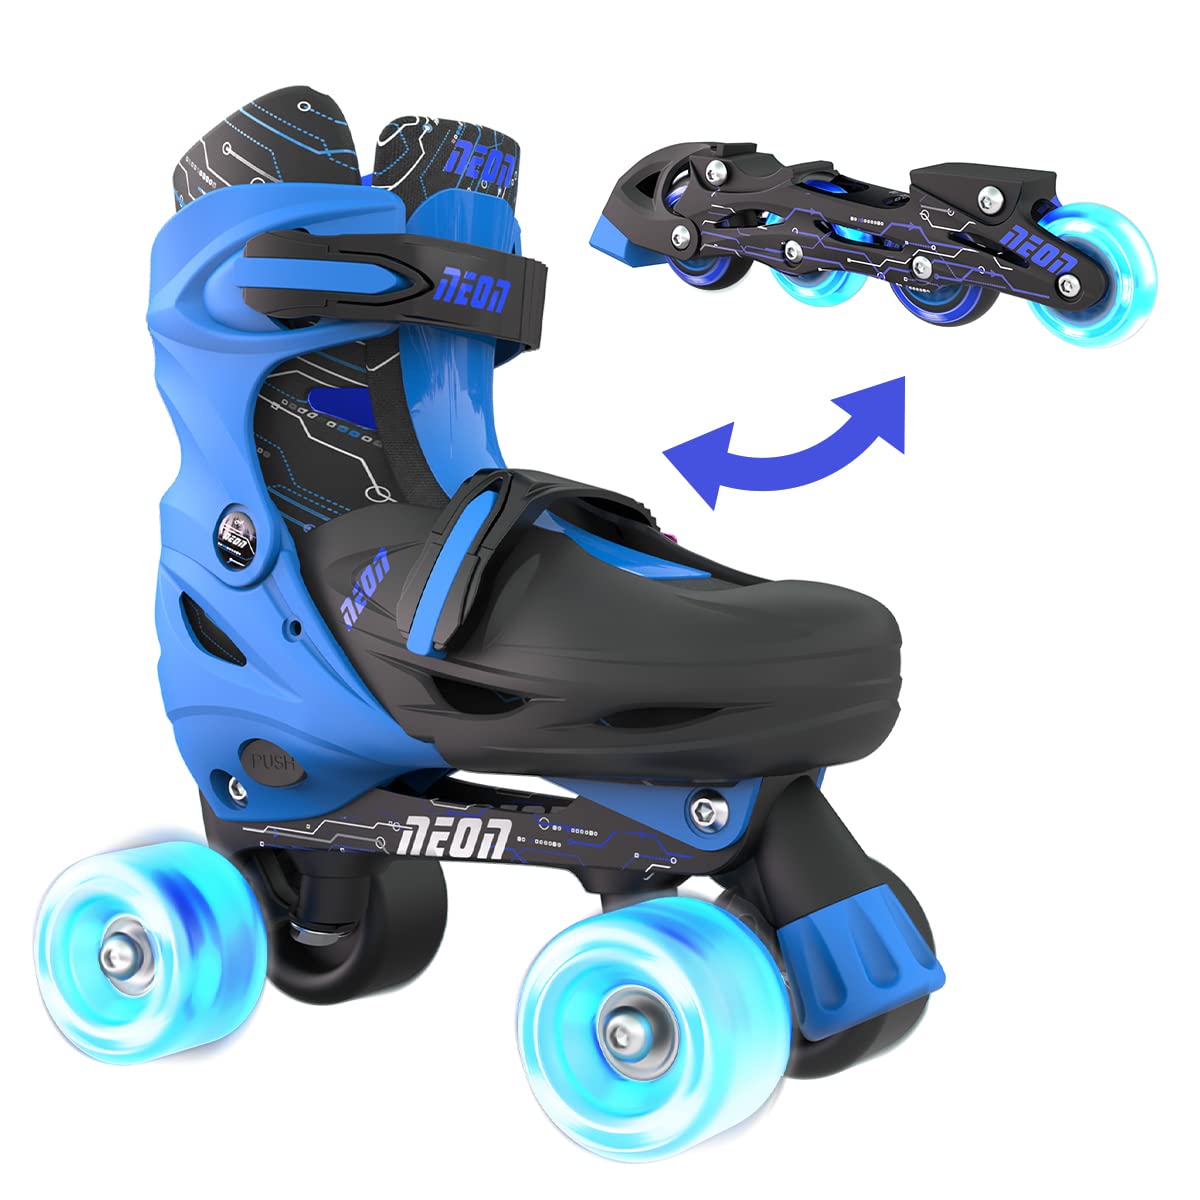 Yvolution Neon Combo Skates Quad and Inline 2-in-1 Adjustable Size Skates with LED Wheels, Outdoor Quad Roller Skates for Girls 